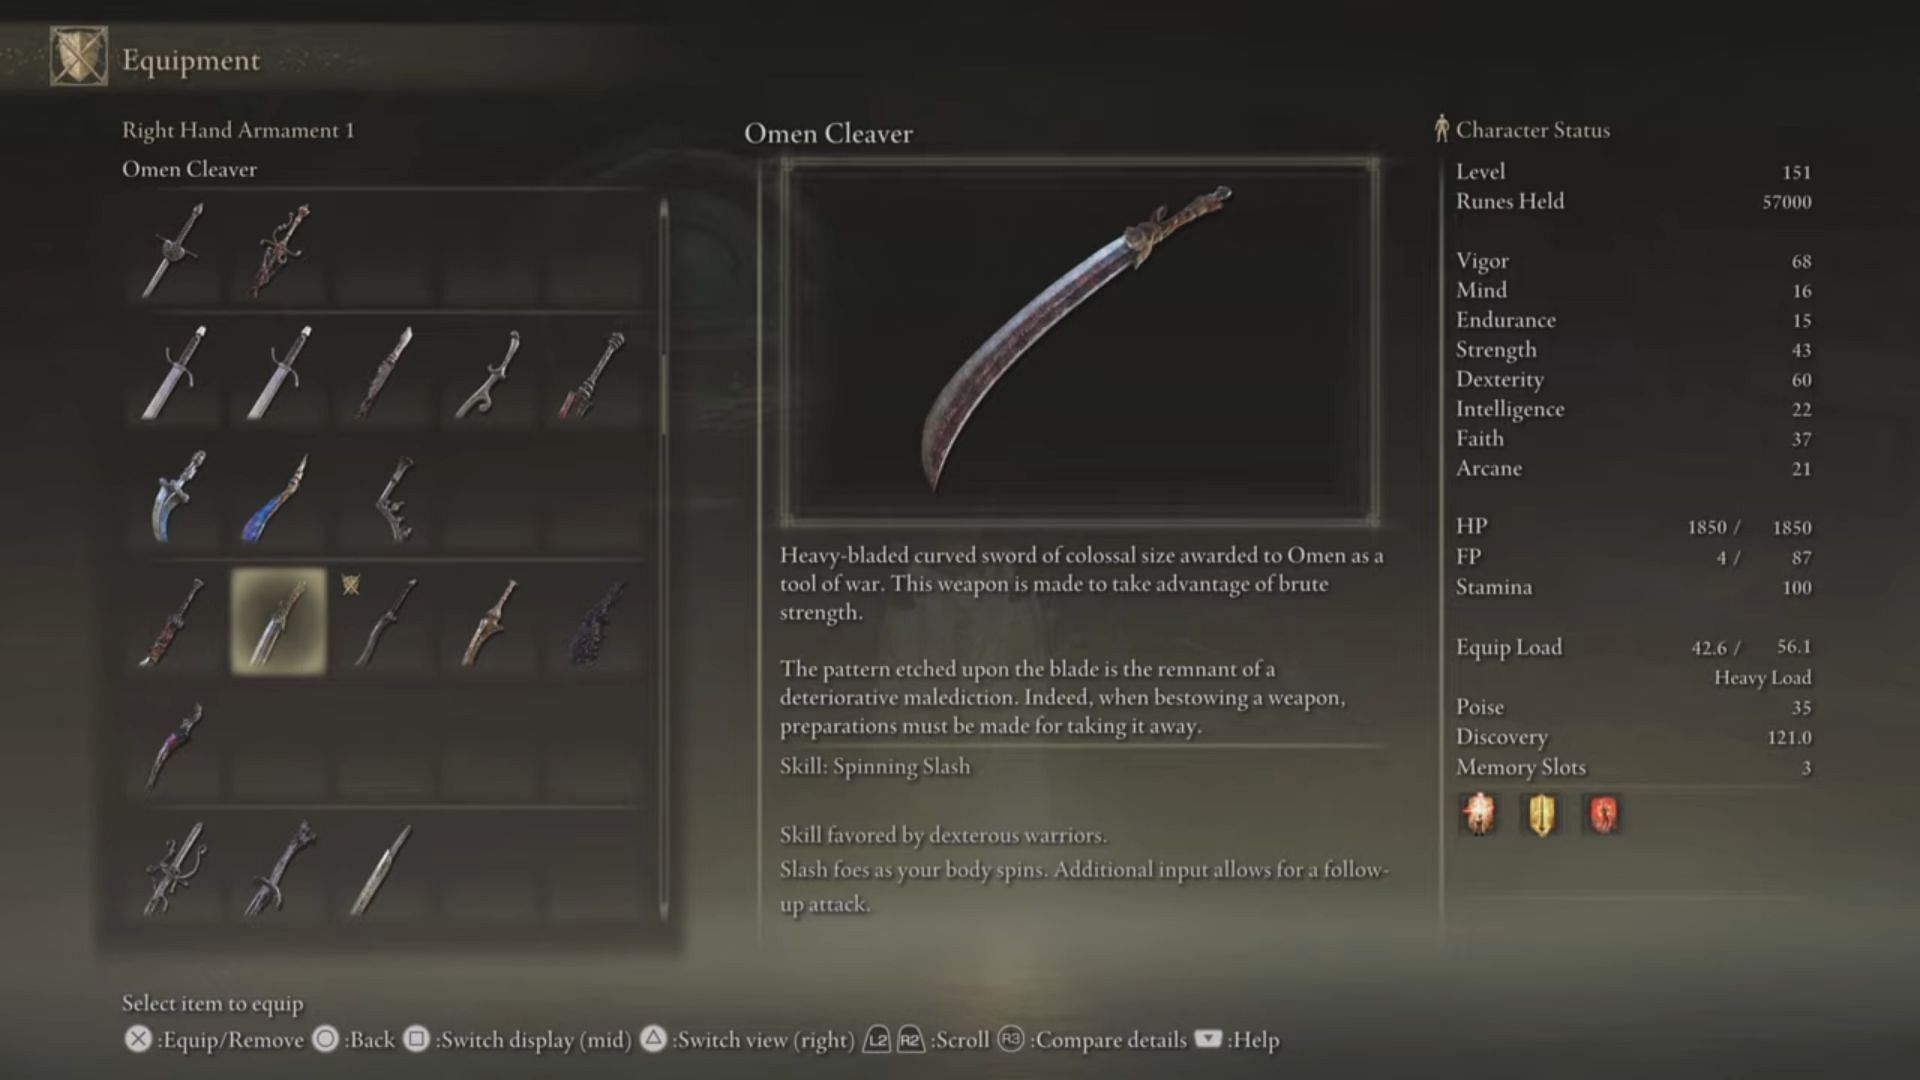 The Omen Cleaver is a powerful weapon available for players (Image via Fredchuckdave/Youtube)